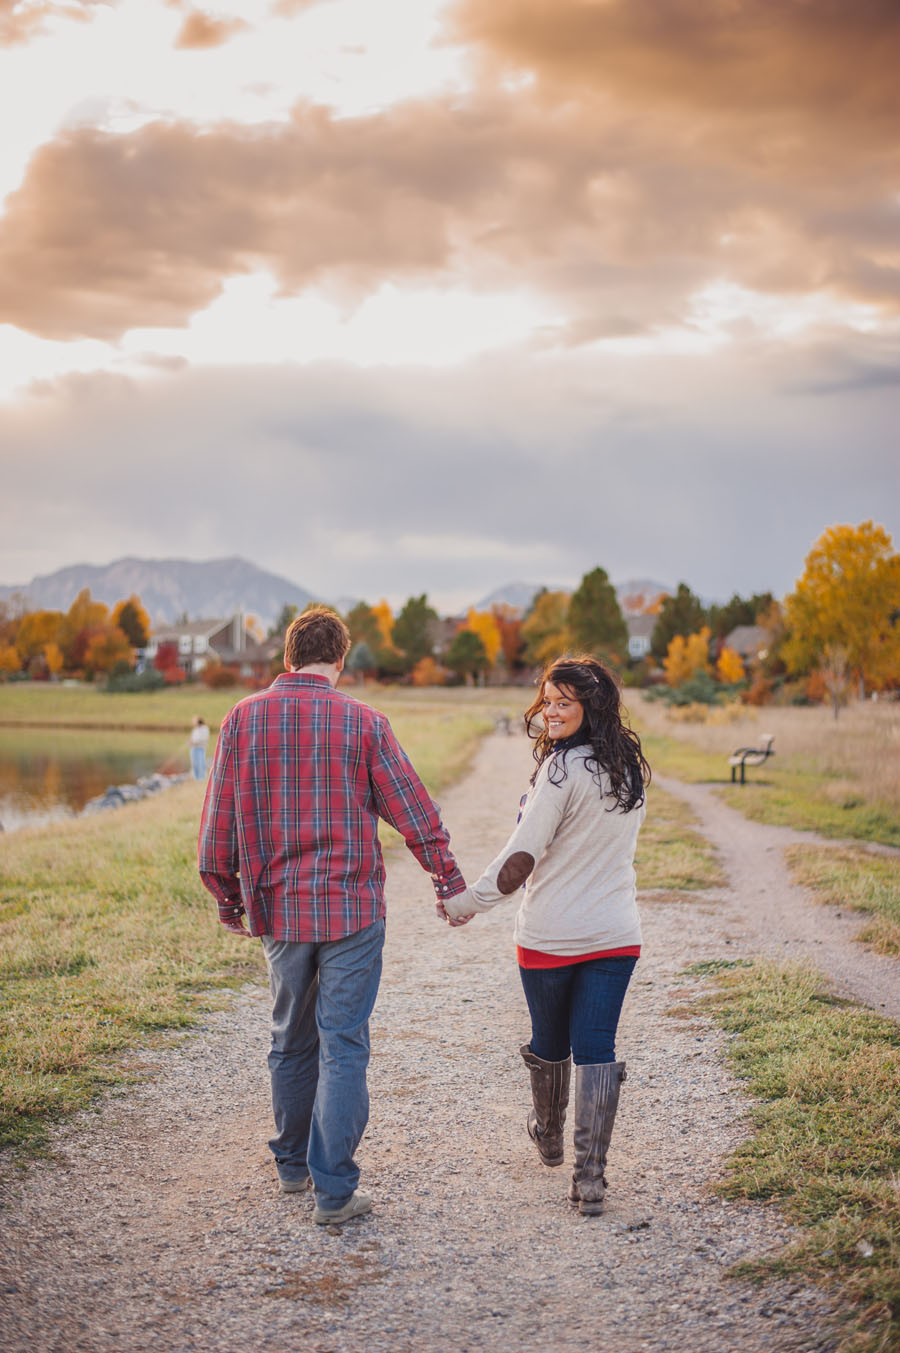 affordable wedding and engagement photos in denver colorado